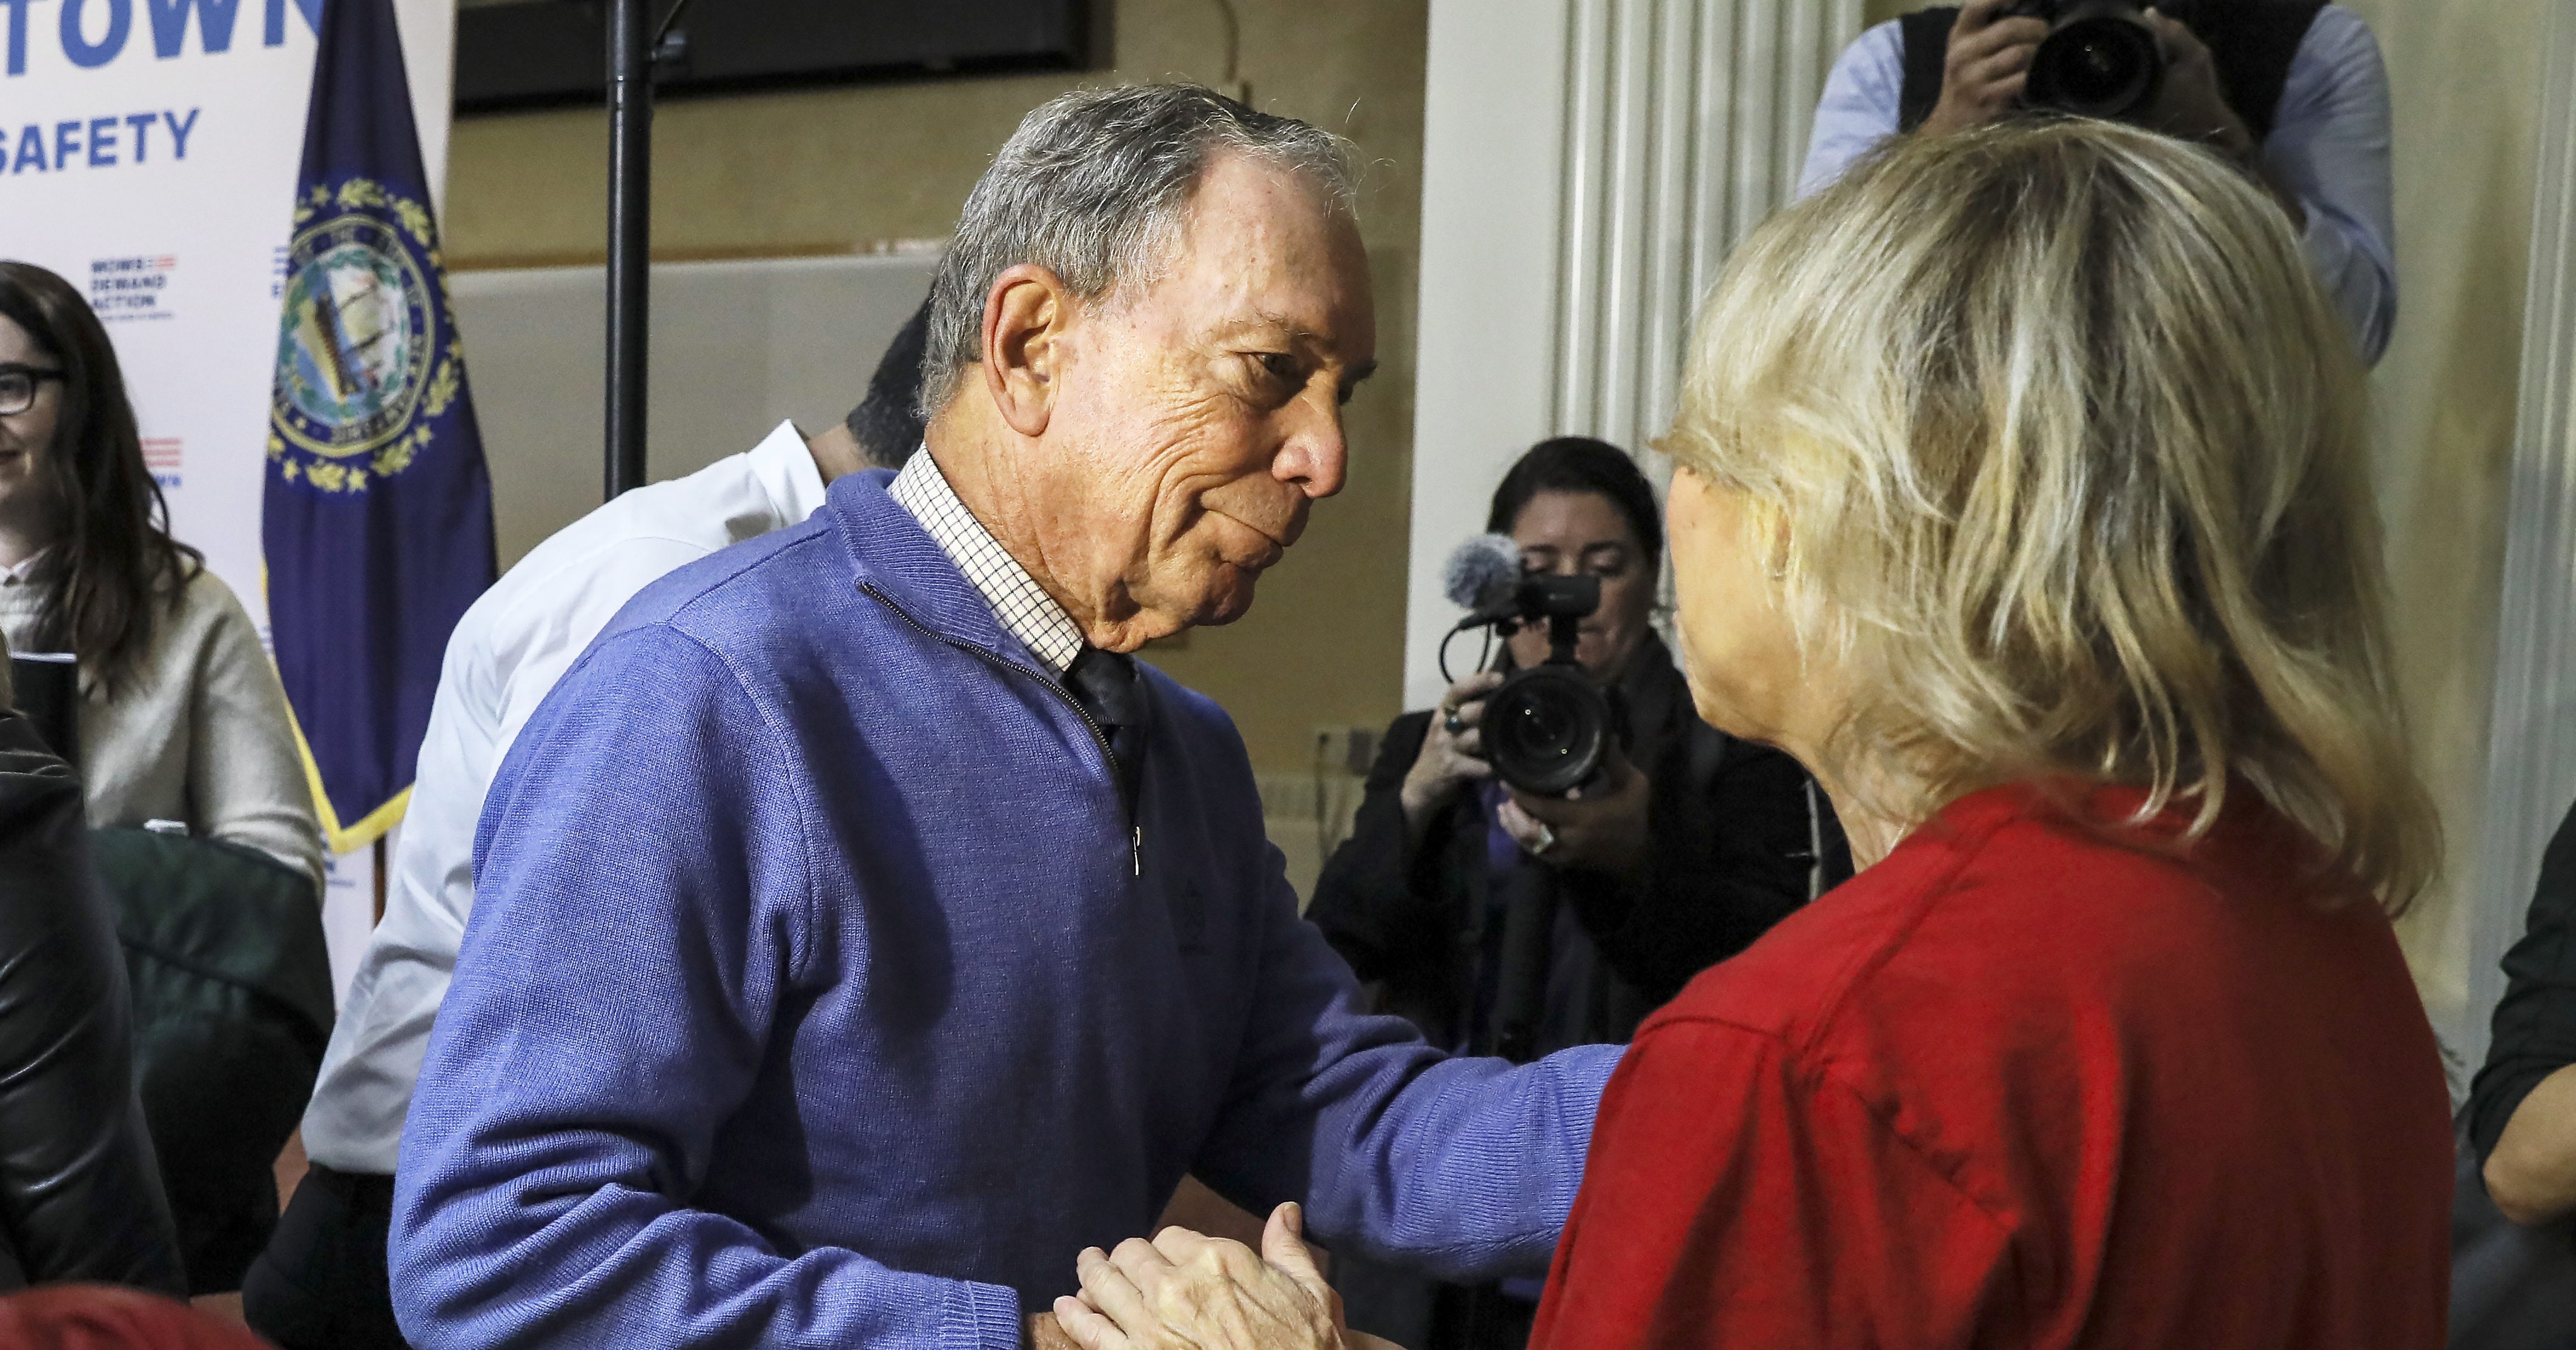 Former New York Mayor Michael Bloomberg talks to a woman